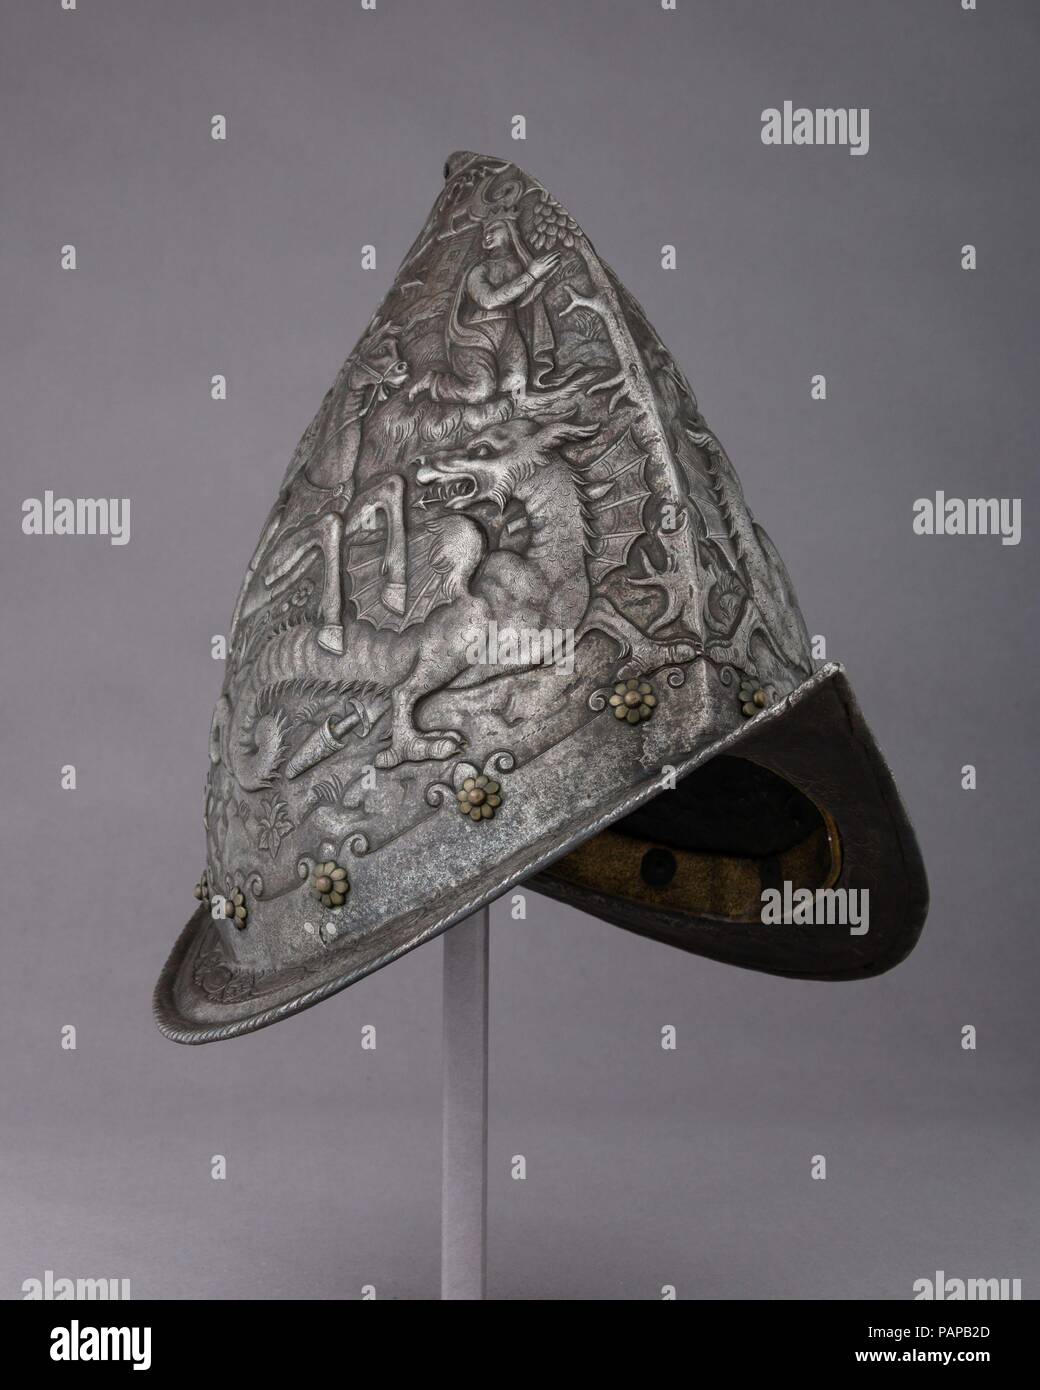 Cabasset. Culture: French or Italian. Dimensions: H. 11 1/4 in. (28.6 cm); W. 9 in. (22.9 cm); D. 13 1/4 in. (33.7 cm); Wt. 2 lb. 13.3 oz. (1284.2 g). Date: 16th century; embossed decoration, probably 18th-19th century. Museum: Metropolitan Museum of Art, New York, USA. Stock Photo